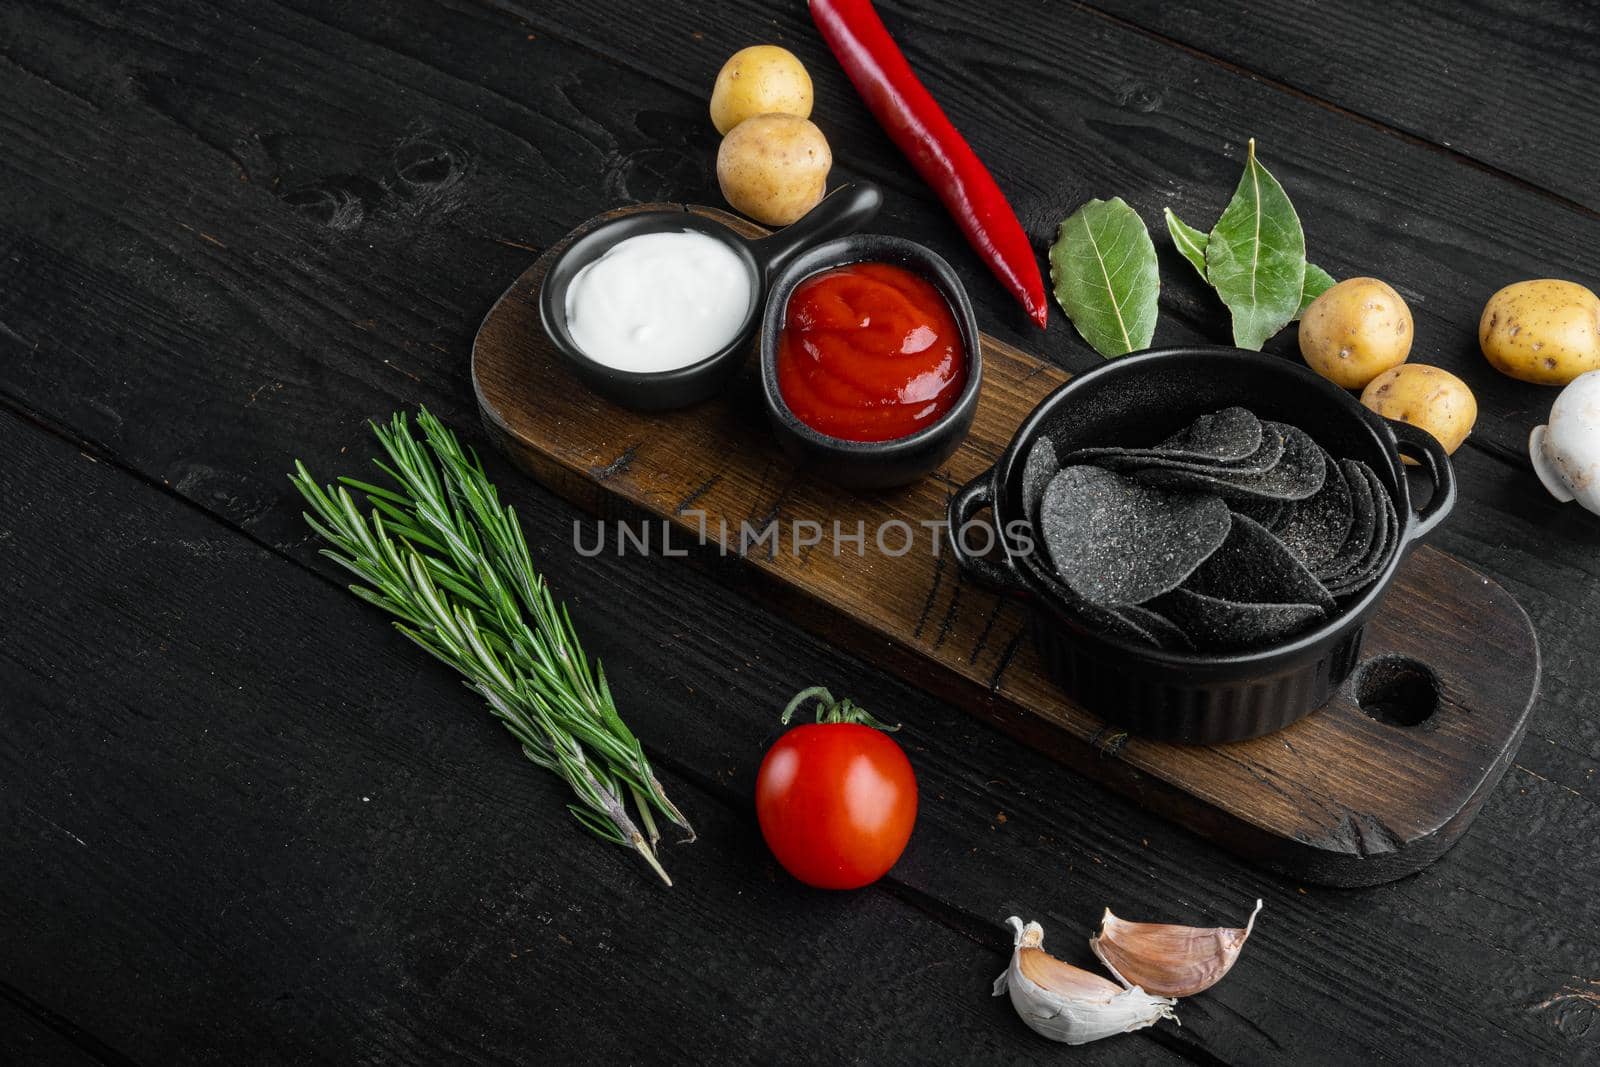 Cheese and chive potato crisp snack, on black wooden background by Ilianesolenyi